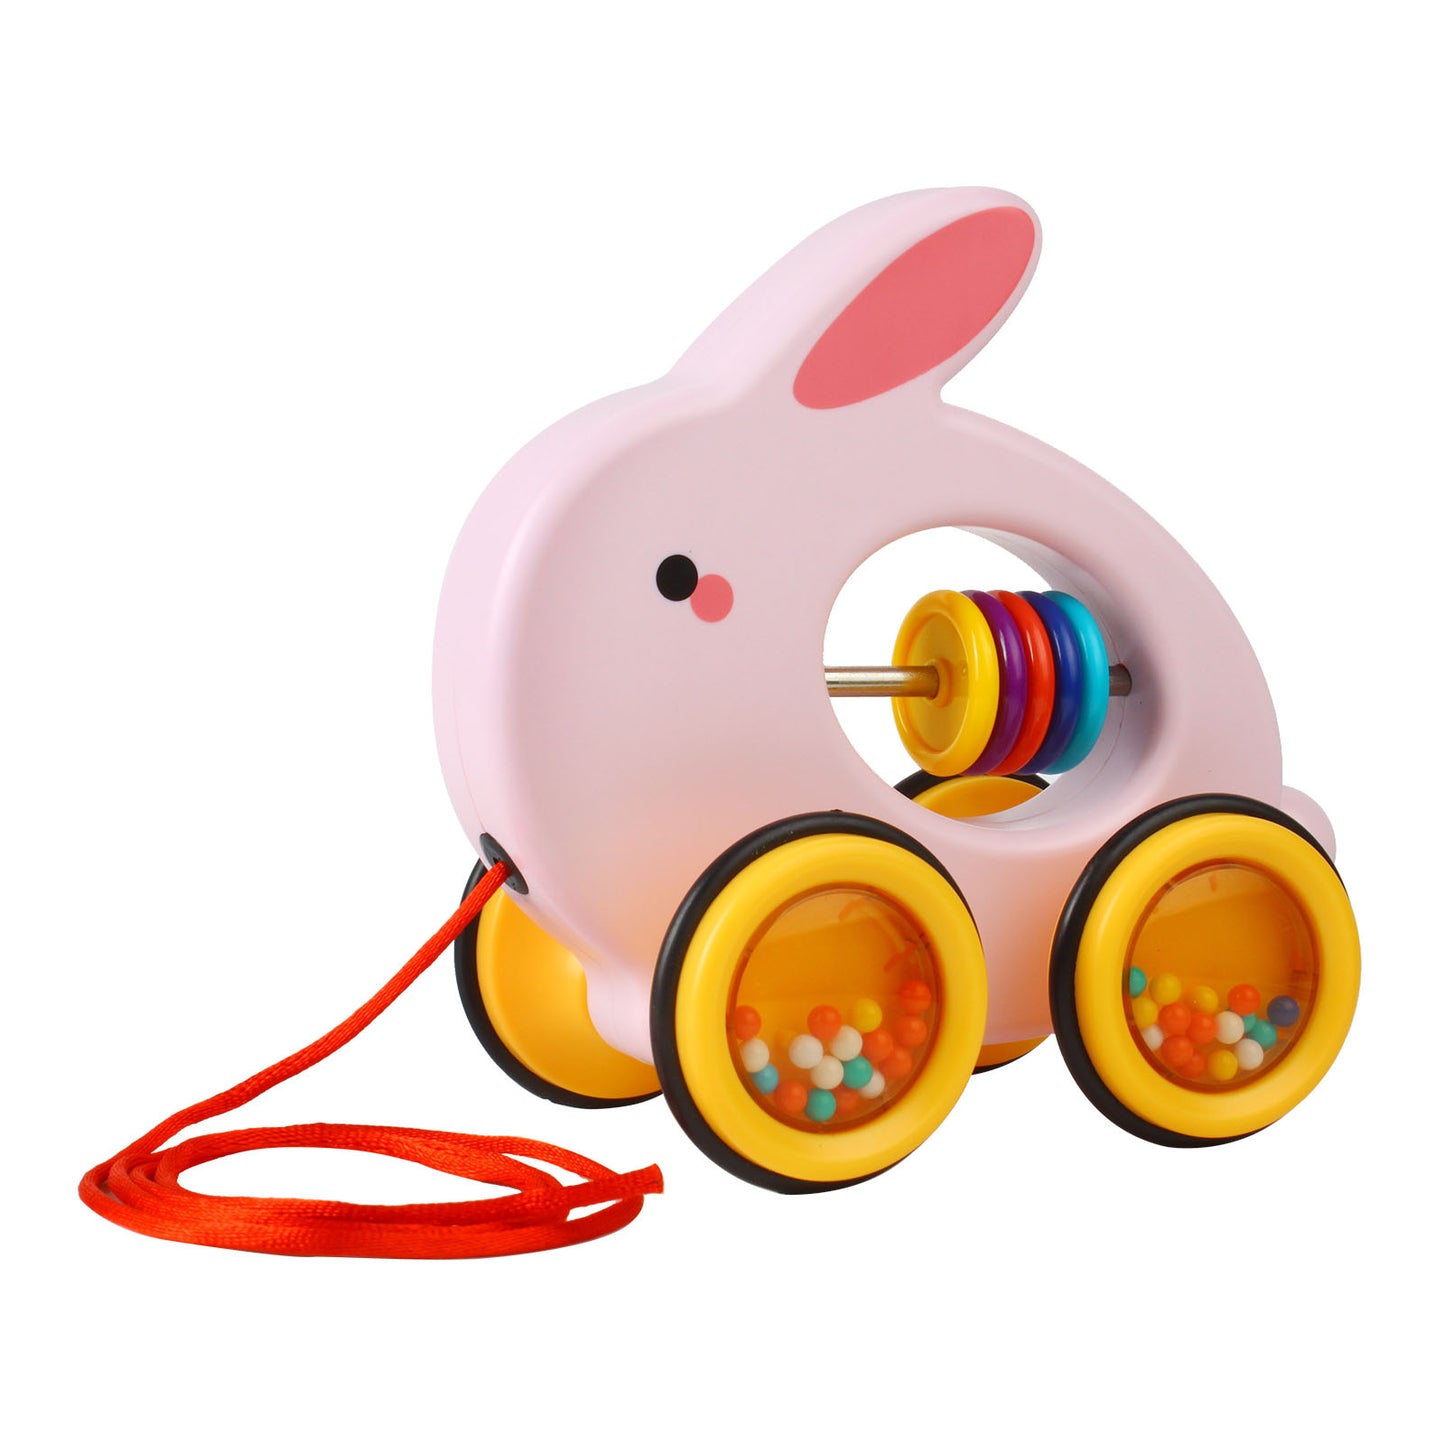 NOOLY Toddler Pull Toys, Pull Along Walking Toy 1 2 3 Years Old TLWJC-01 (Cute Rabbit)